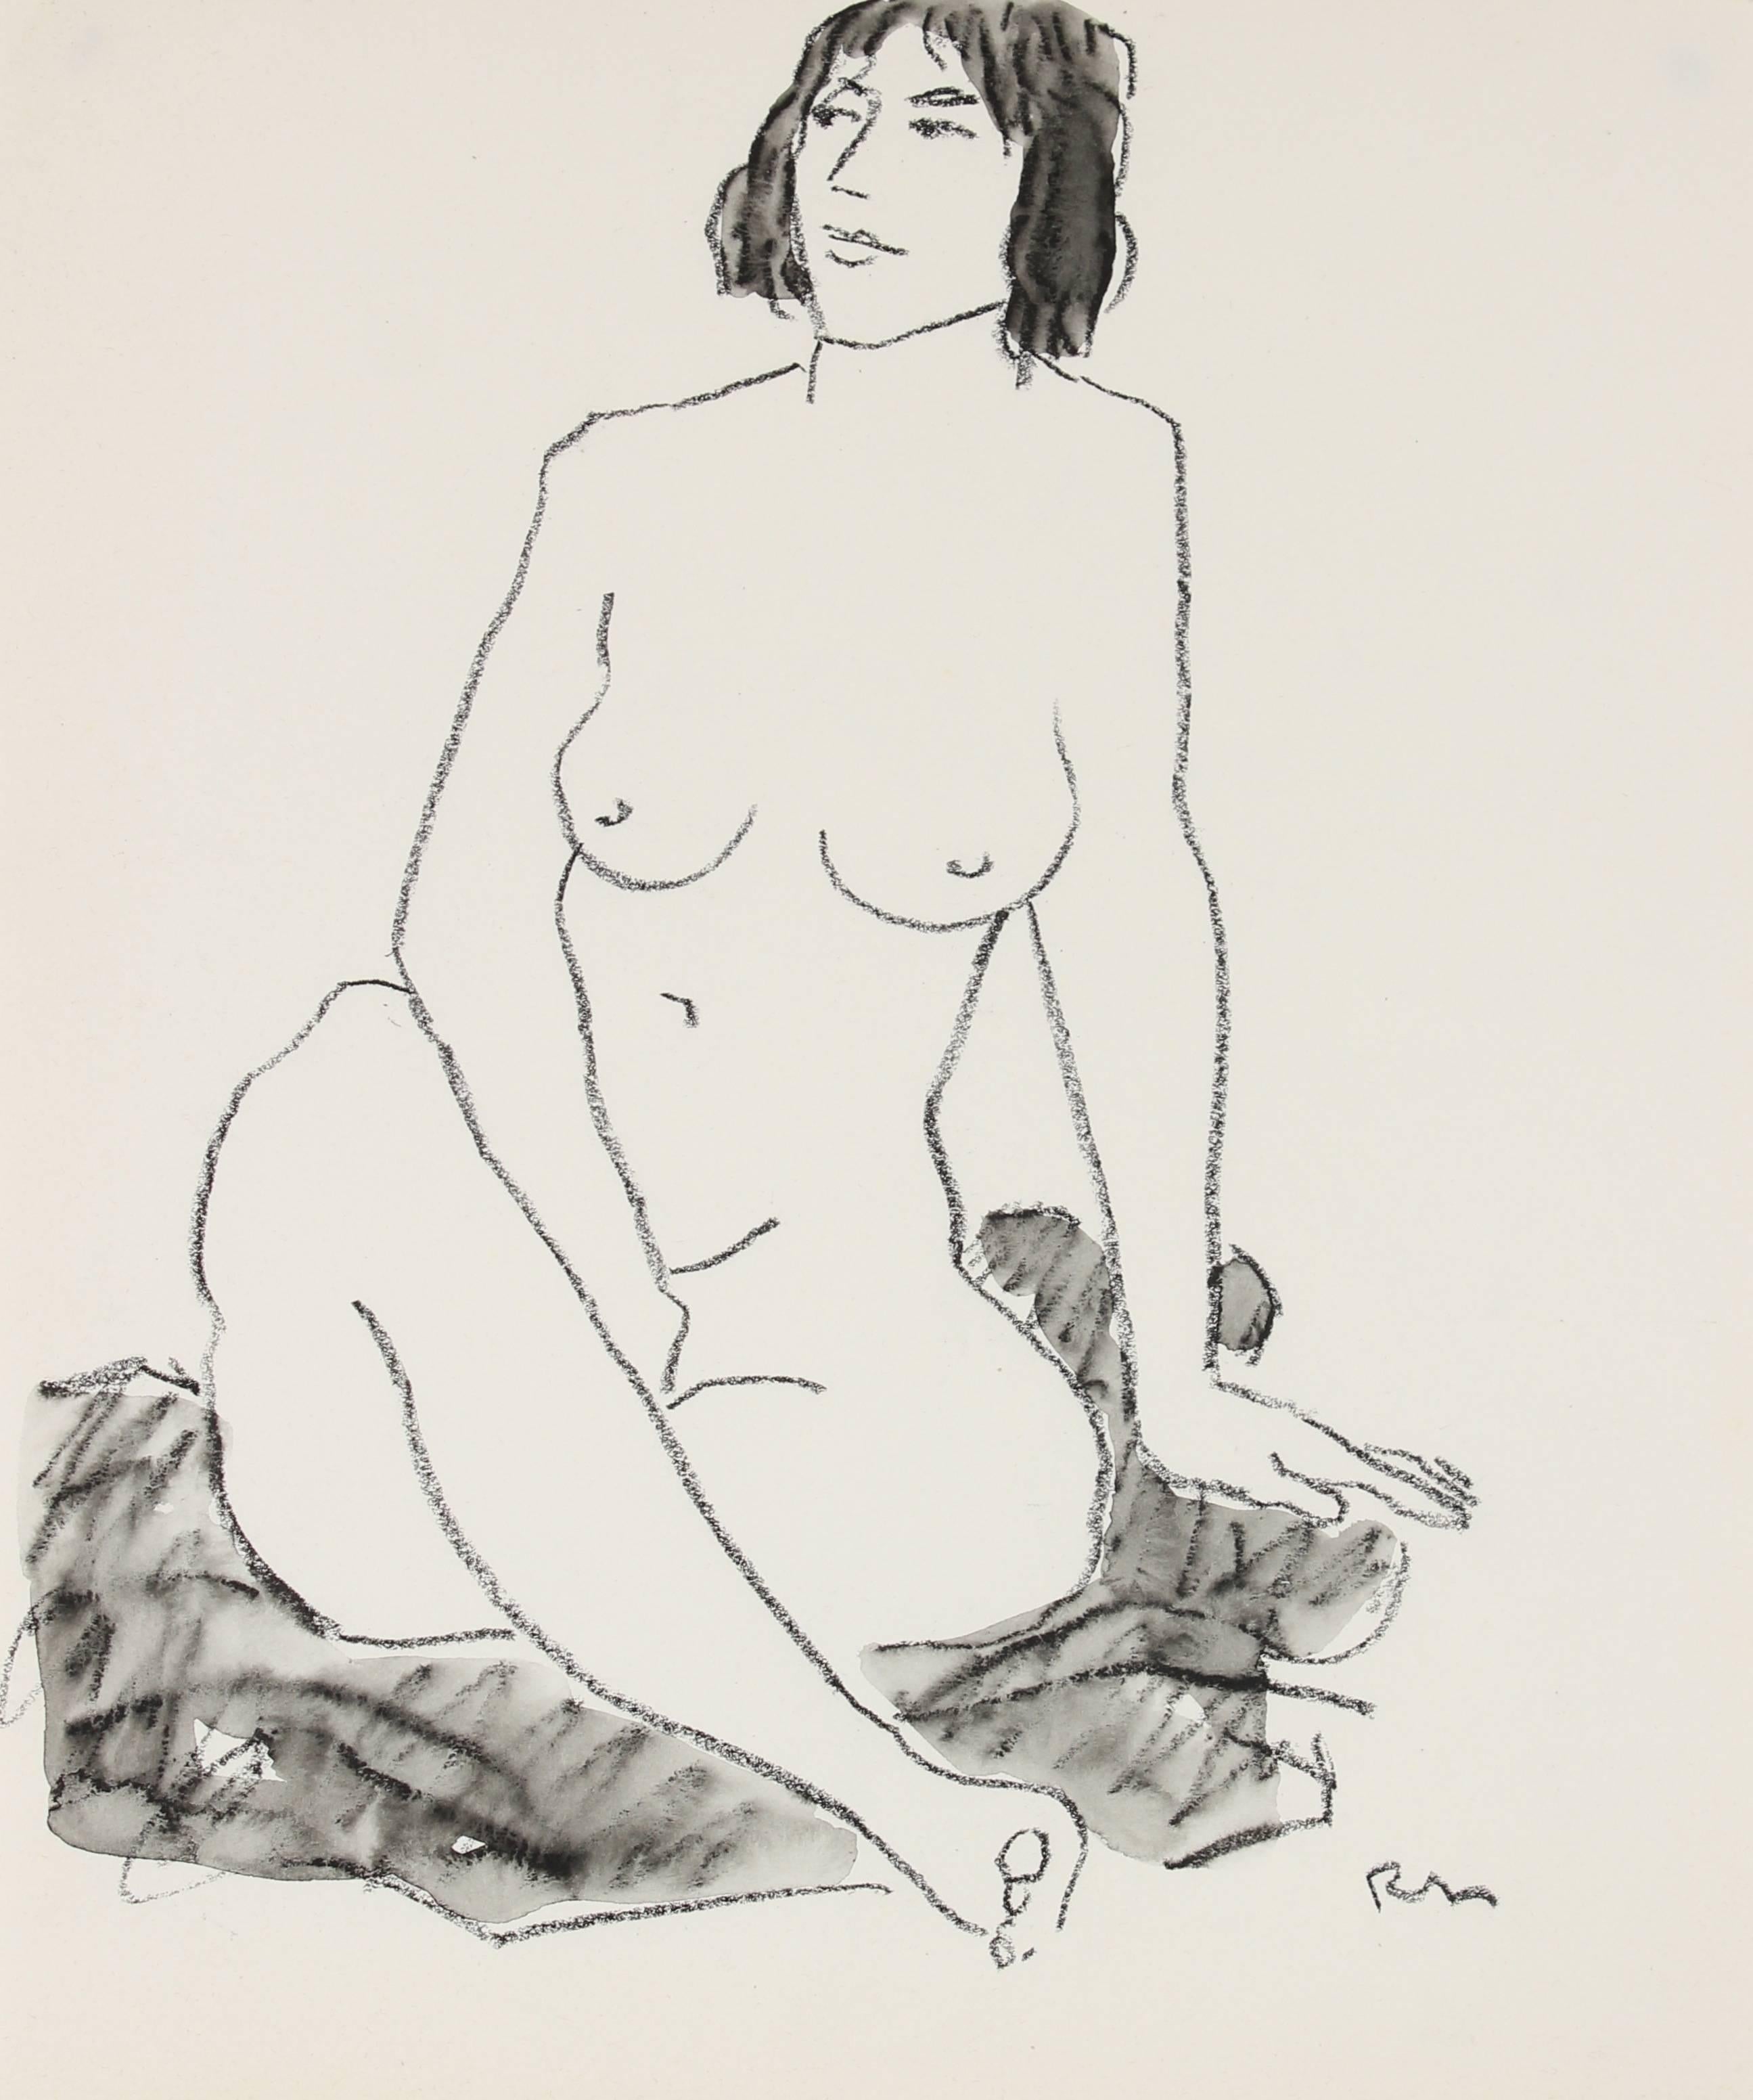 Seated Female Figure in Ink and Charcoal, 20th Century